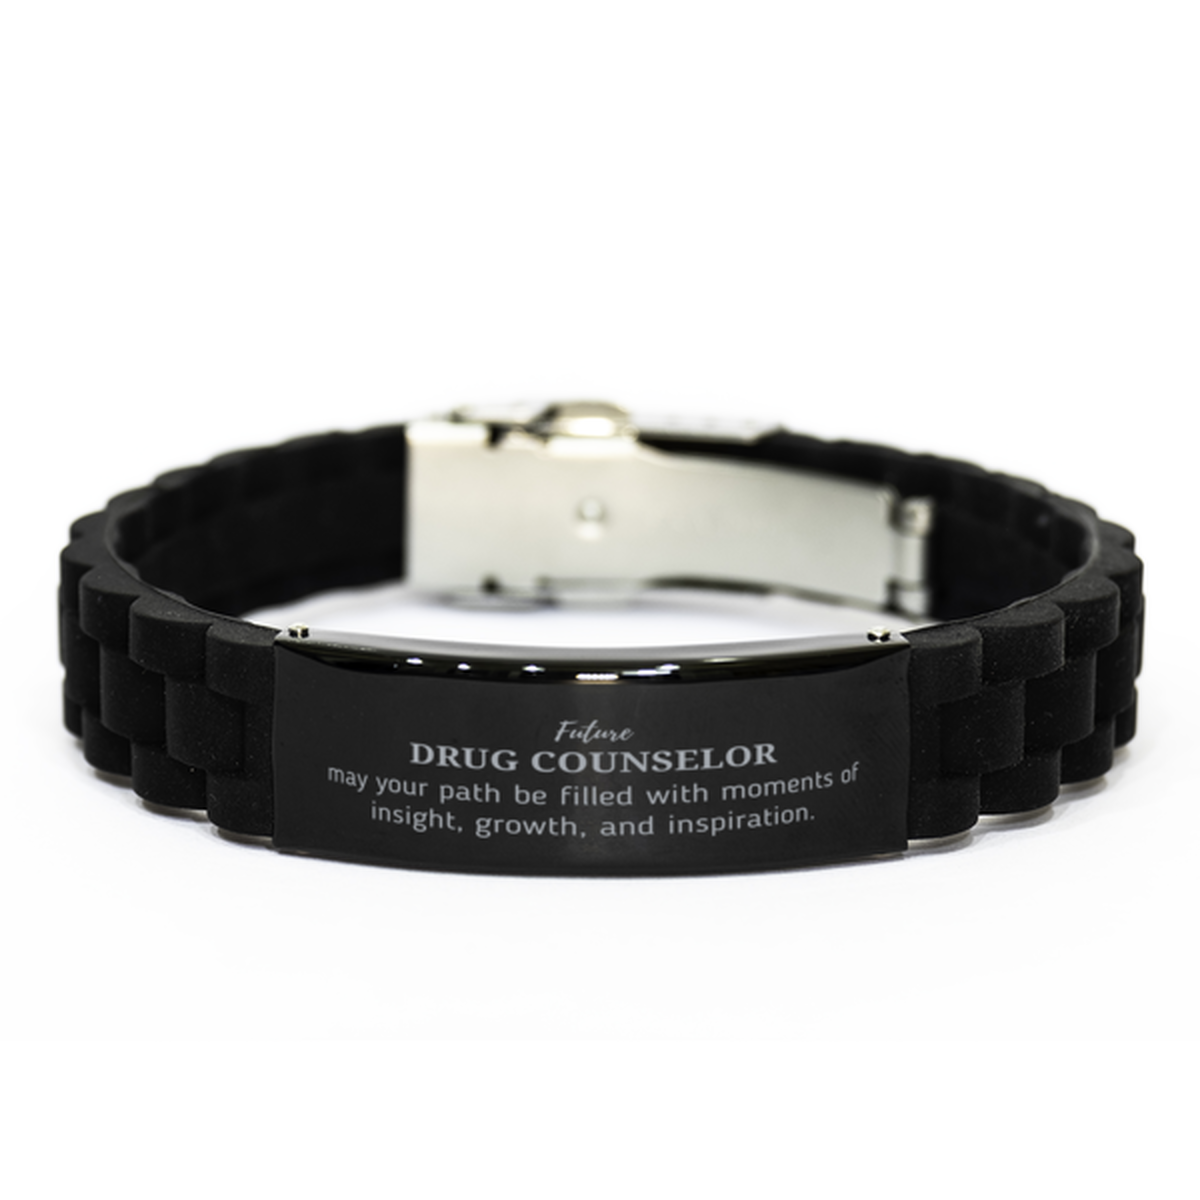 Future Drug Counselor Gifts, May your path be filled with moments of insight, Graduation Gifts for New Drug Counselor, Christmas Unique Black Glidelock Clasp Bracelet For Men, Women, Friends